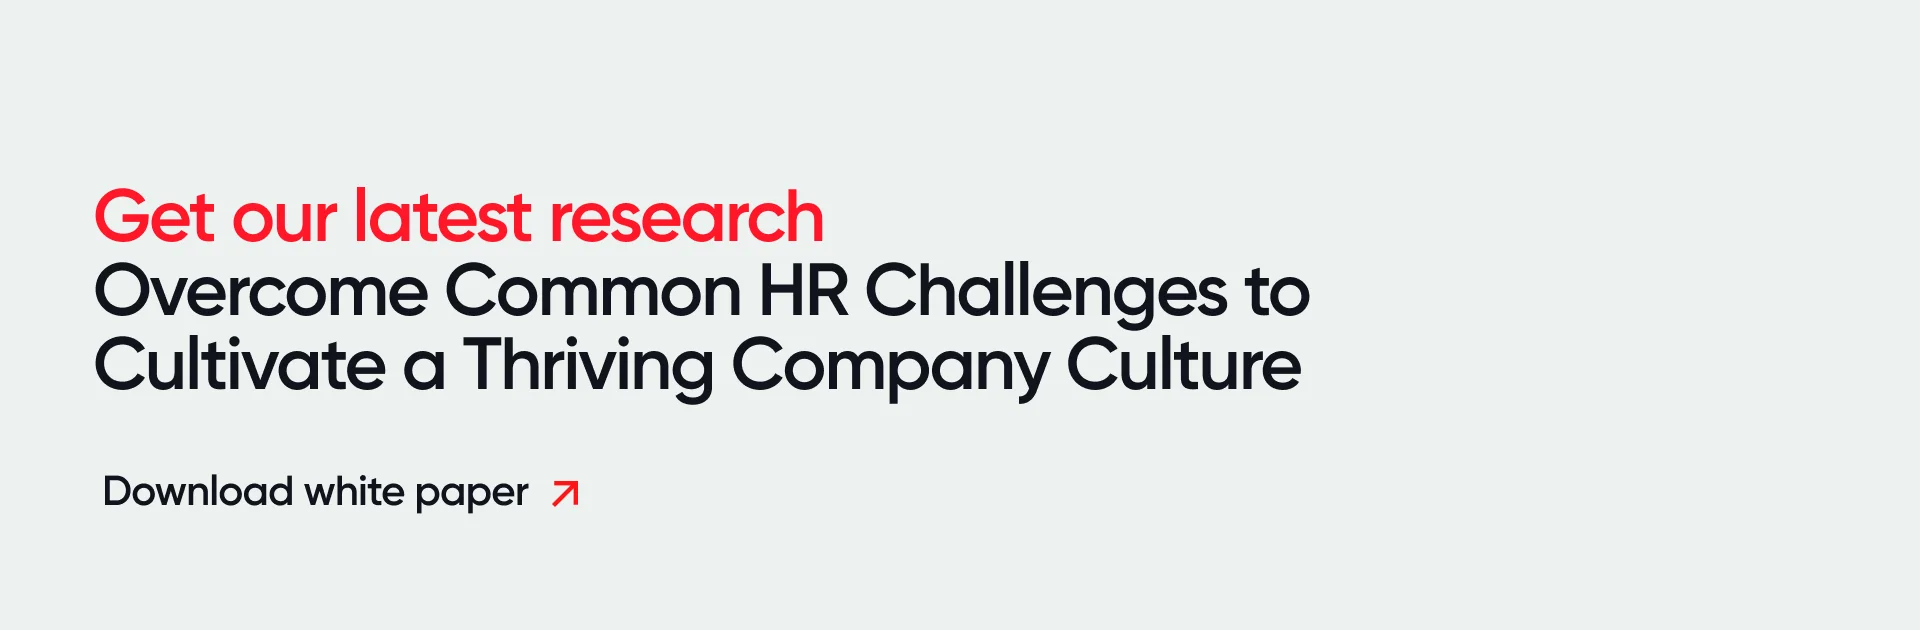 Get Our Latest Research -- Overcome Common HR Challenges